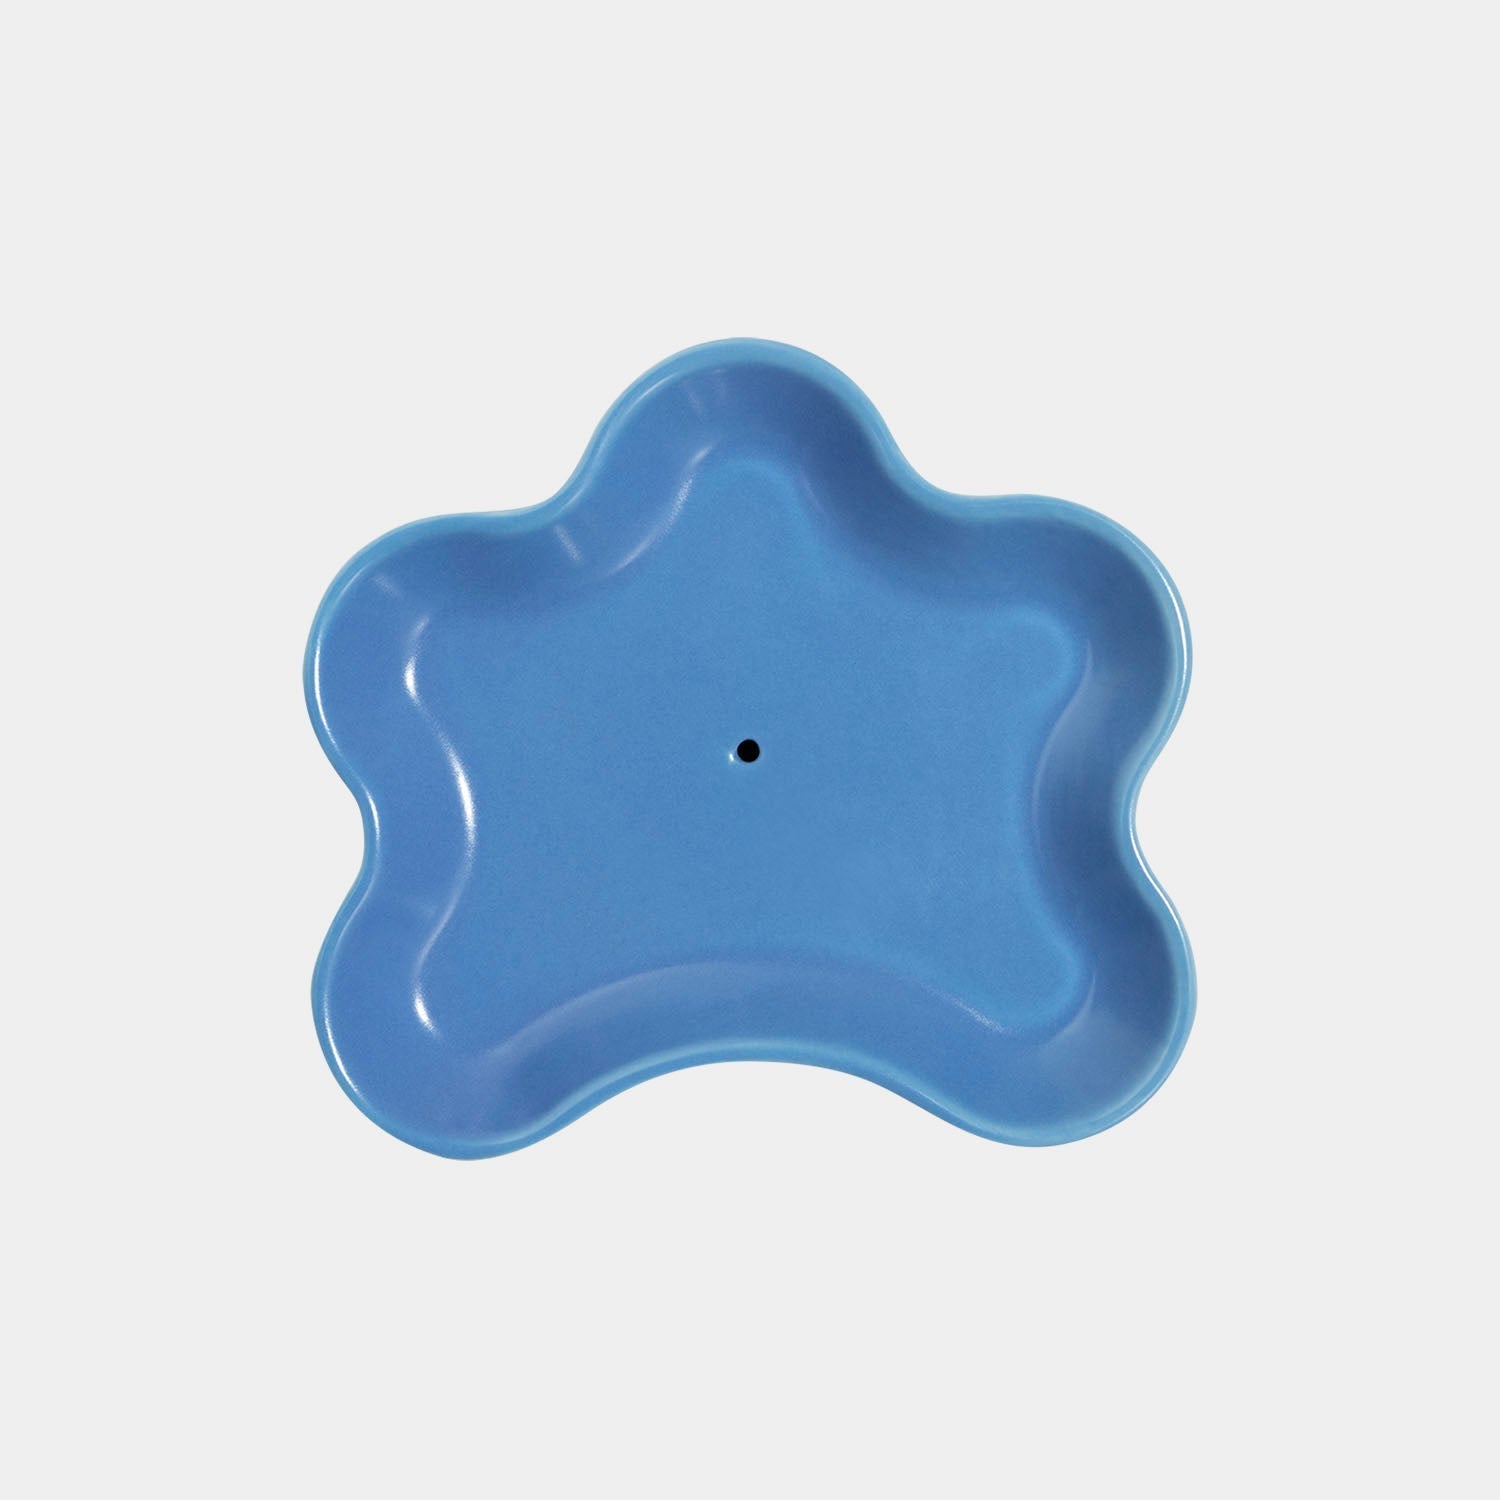 Incense Holder Templo in blue by OCTAEVO